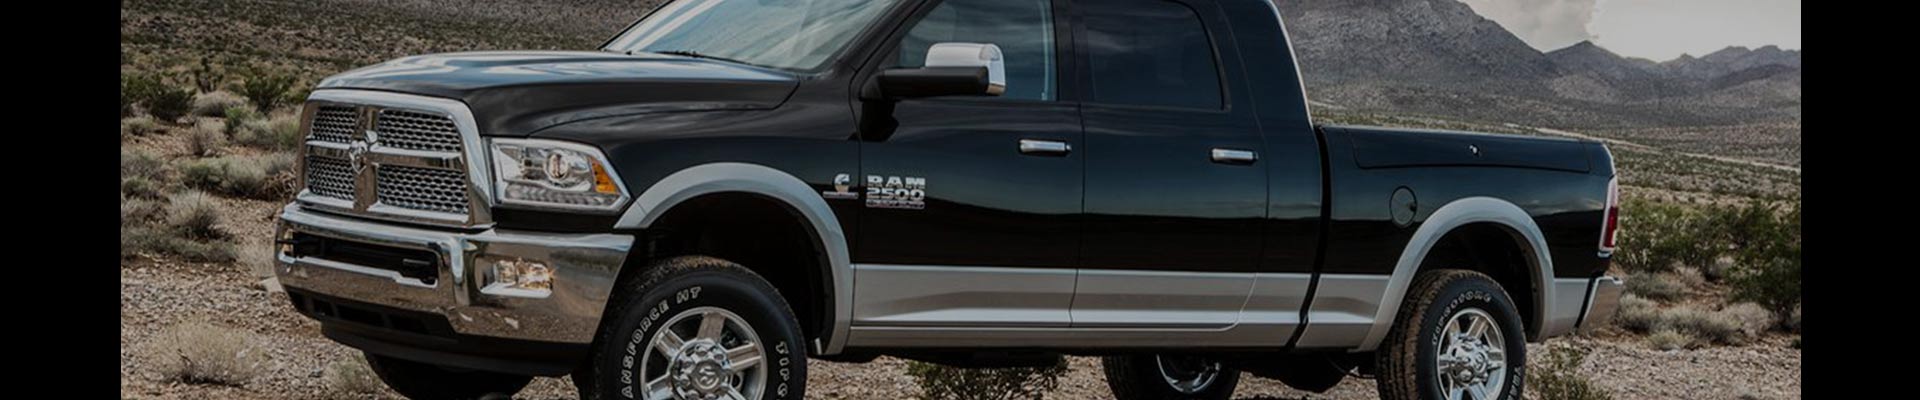 Shop Replacement and OEM 2018 Ram 2500 Parts with Discounted Price on the Net